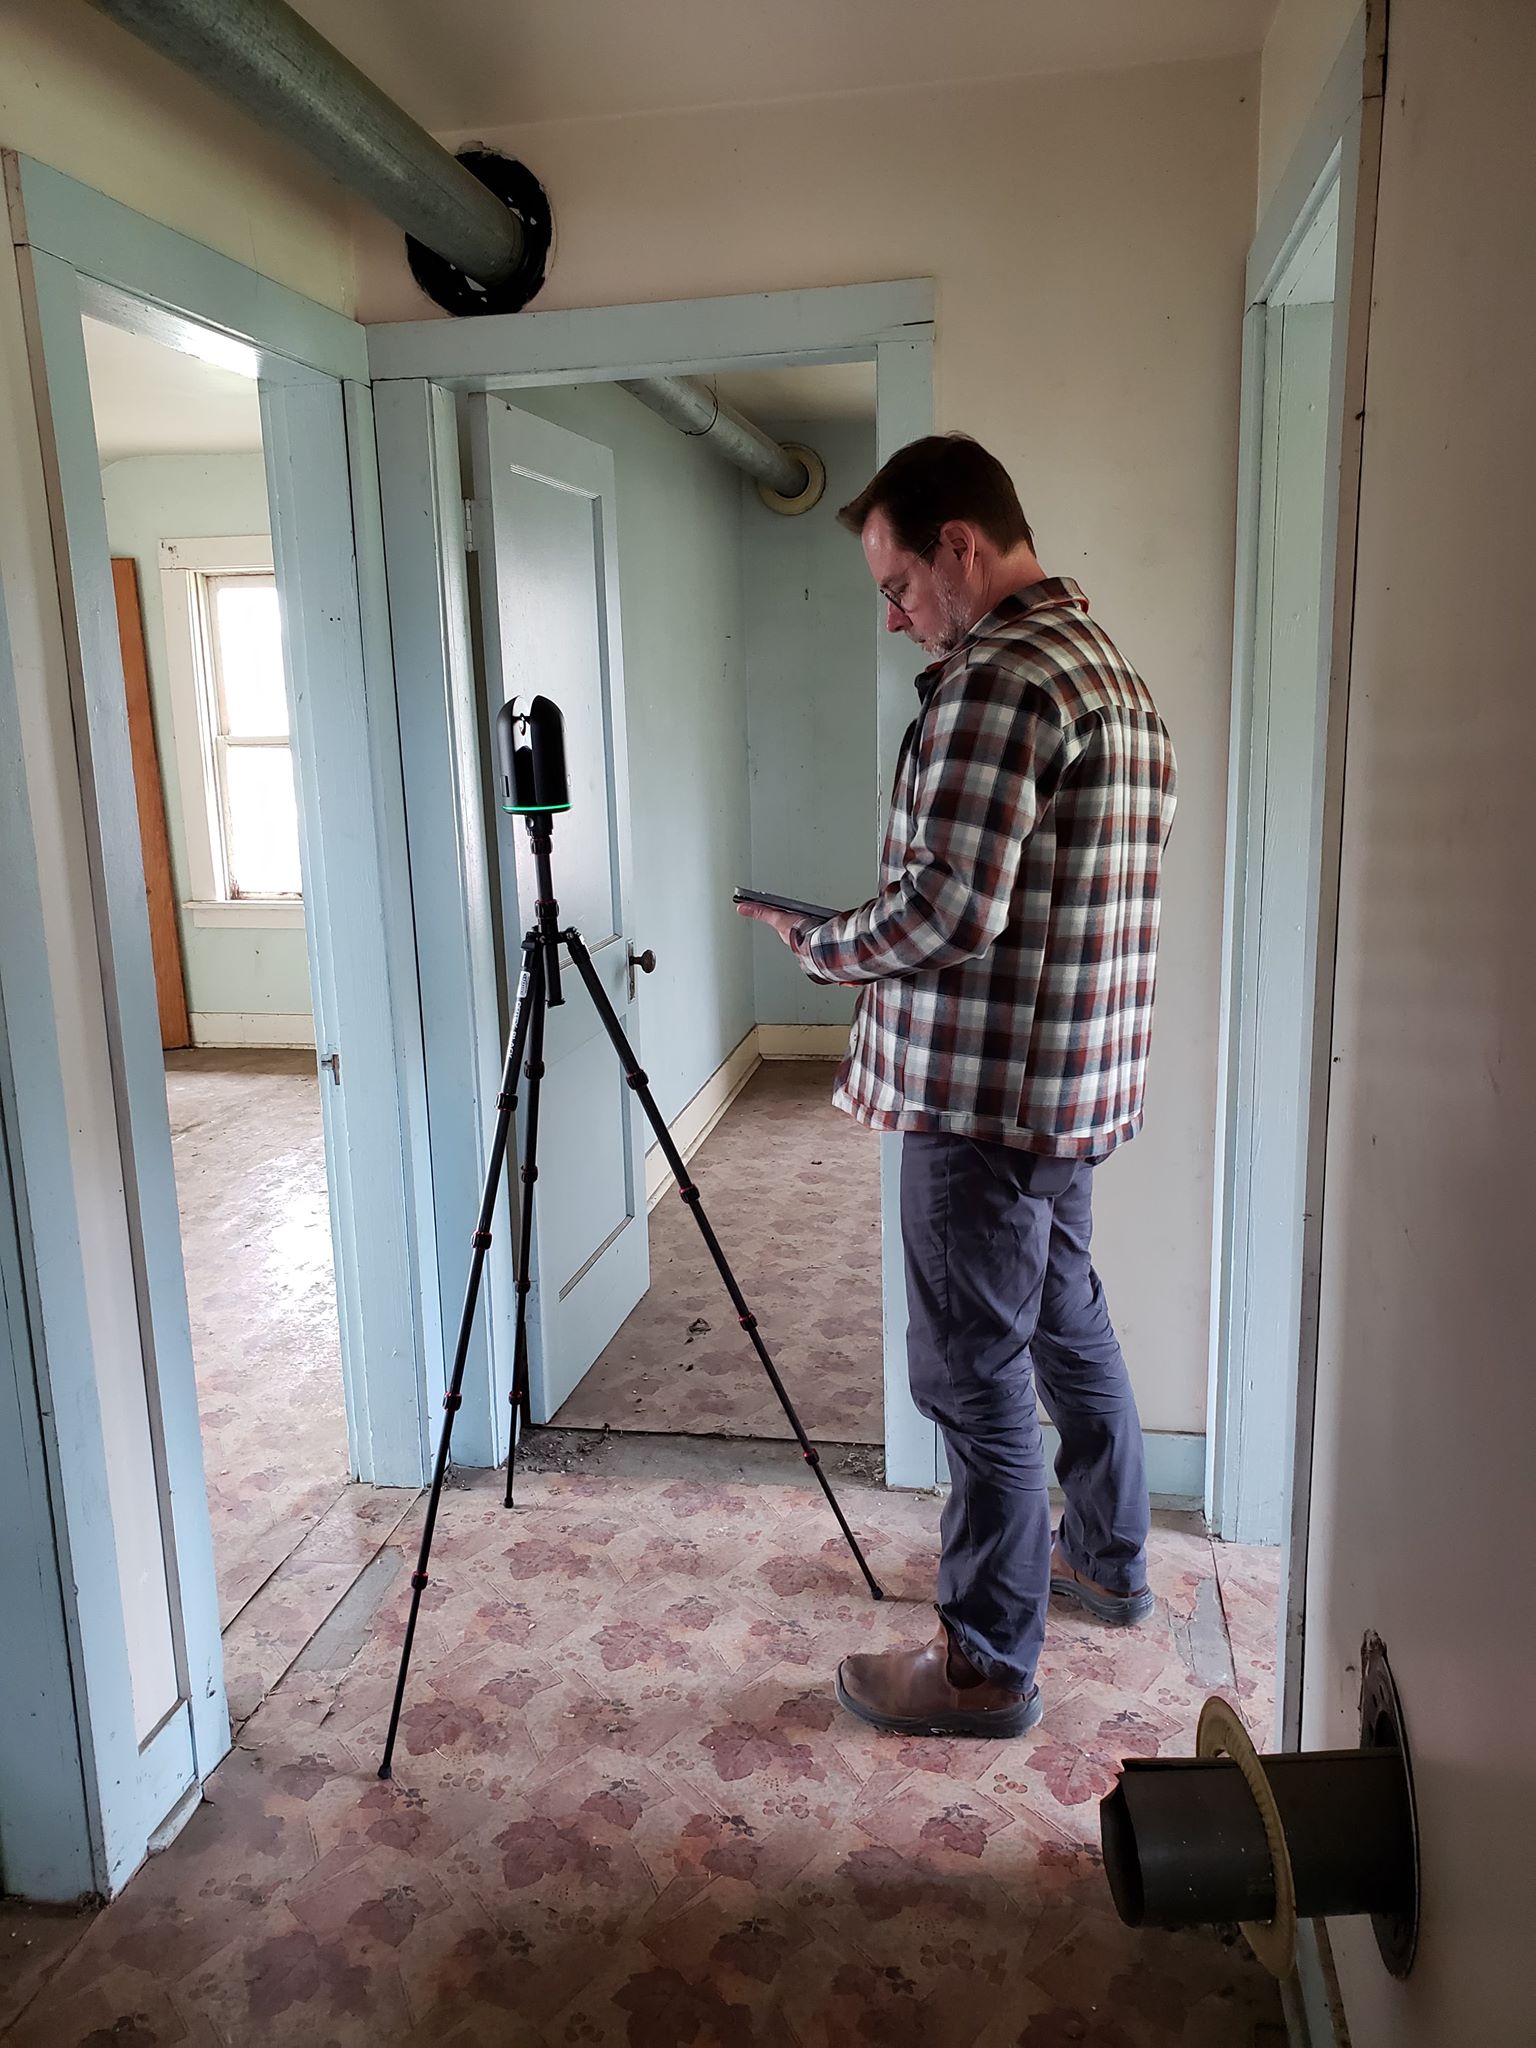 Dr Pete Dawson scanning the interior of the Jobber's House using the Leica BLK 360 terrestrial laser scanner